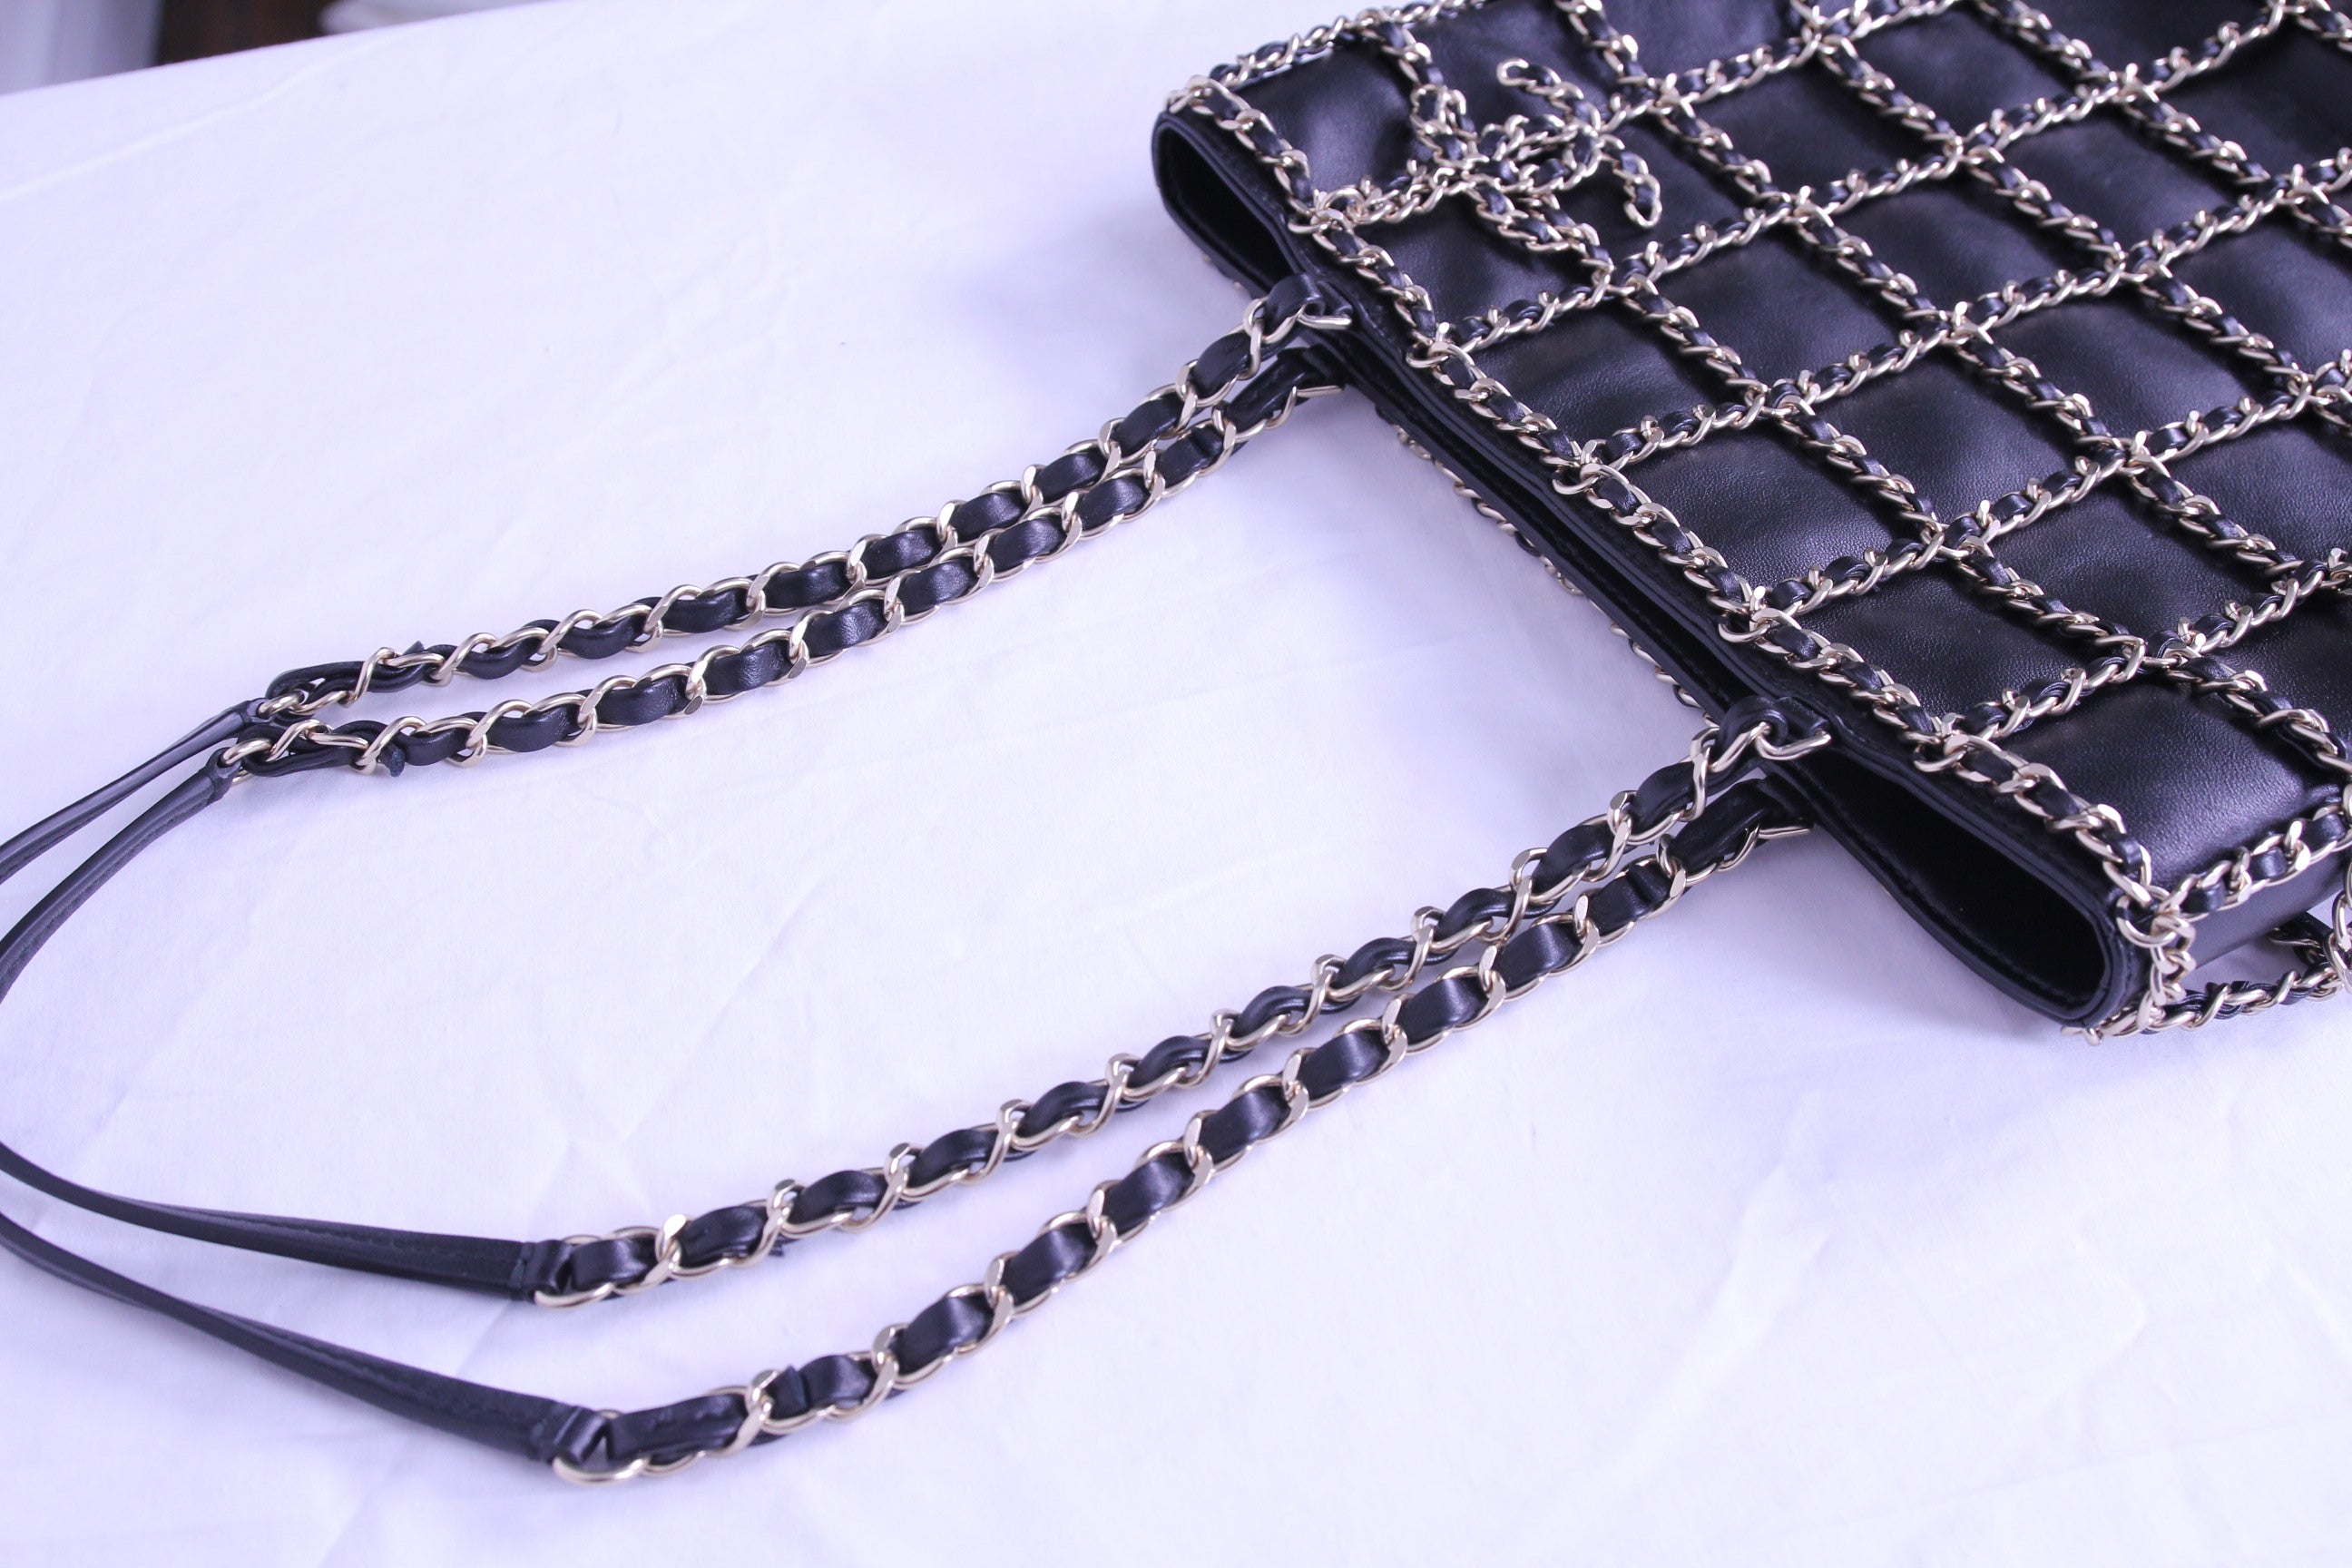 Top of Chanel caged tote with chain finished in black calfskin